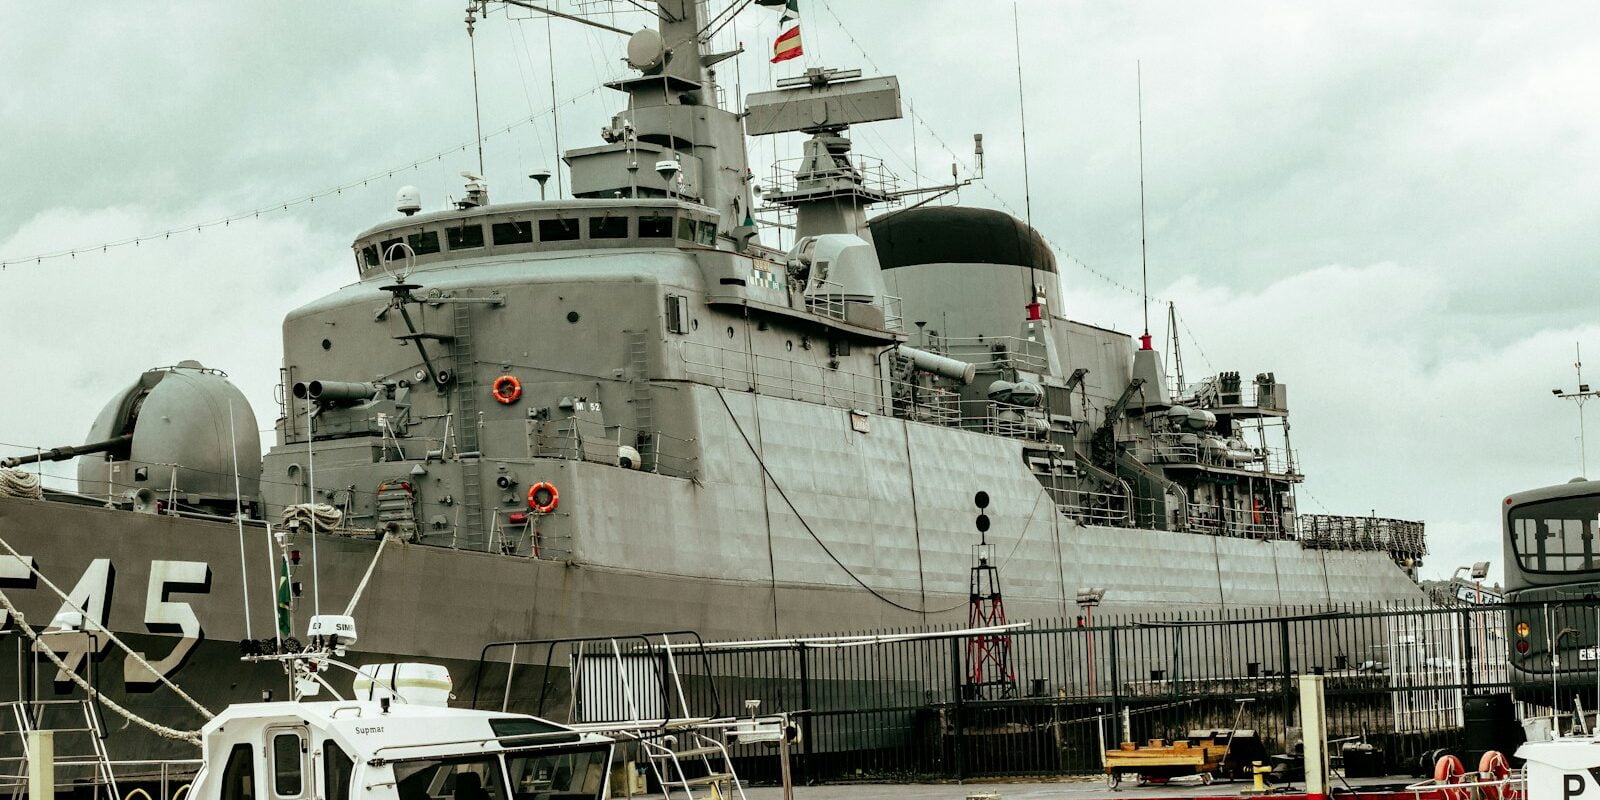 a large gray ship docked in a harbor